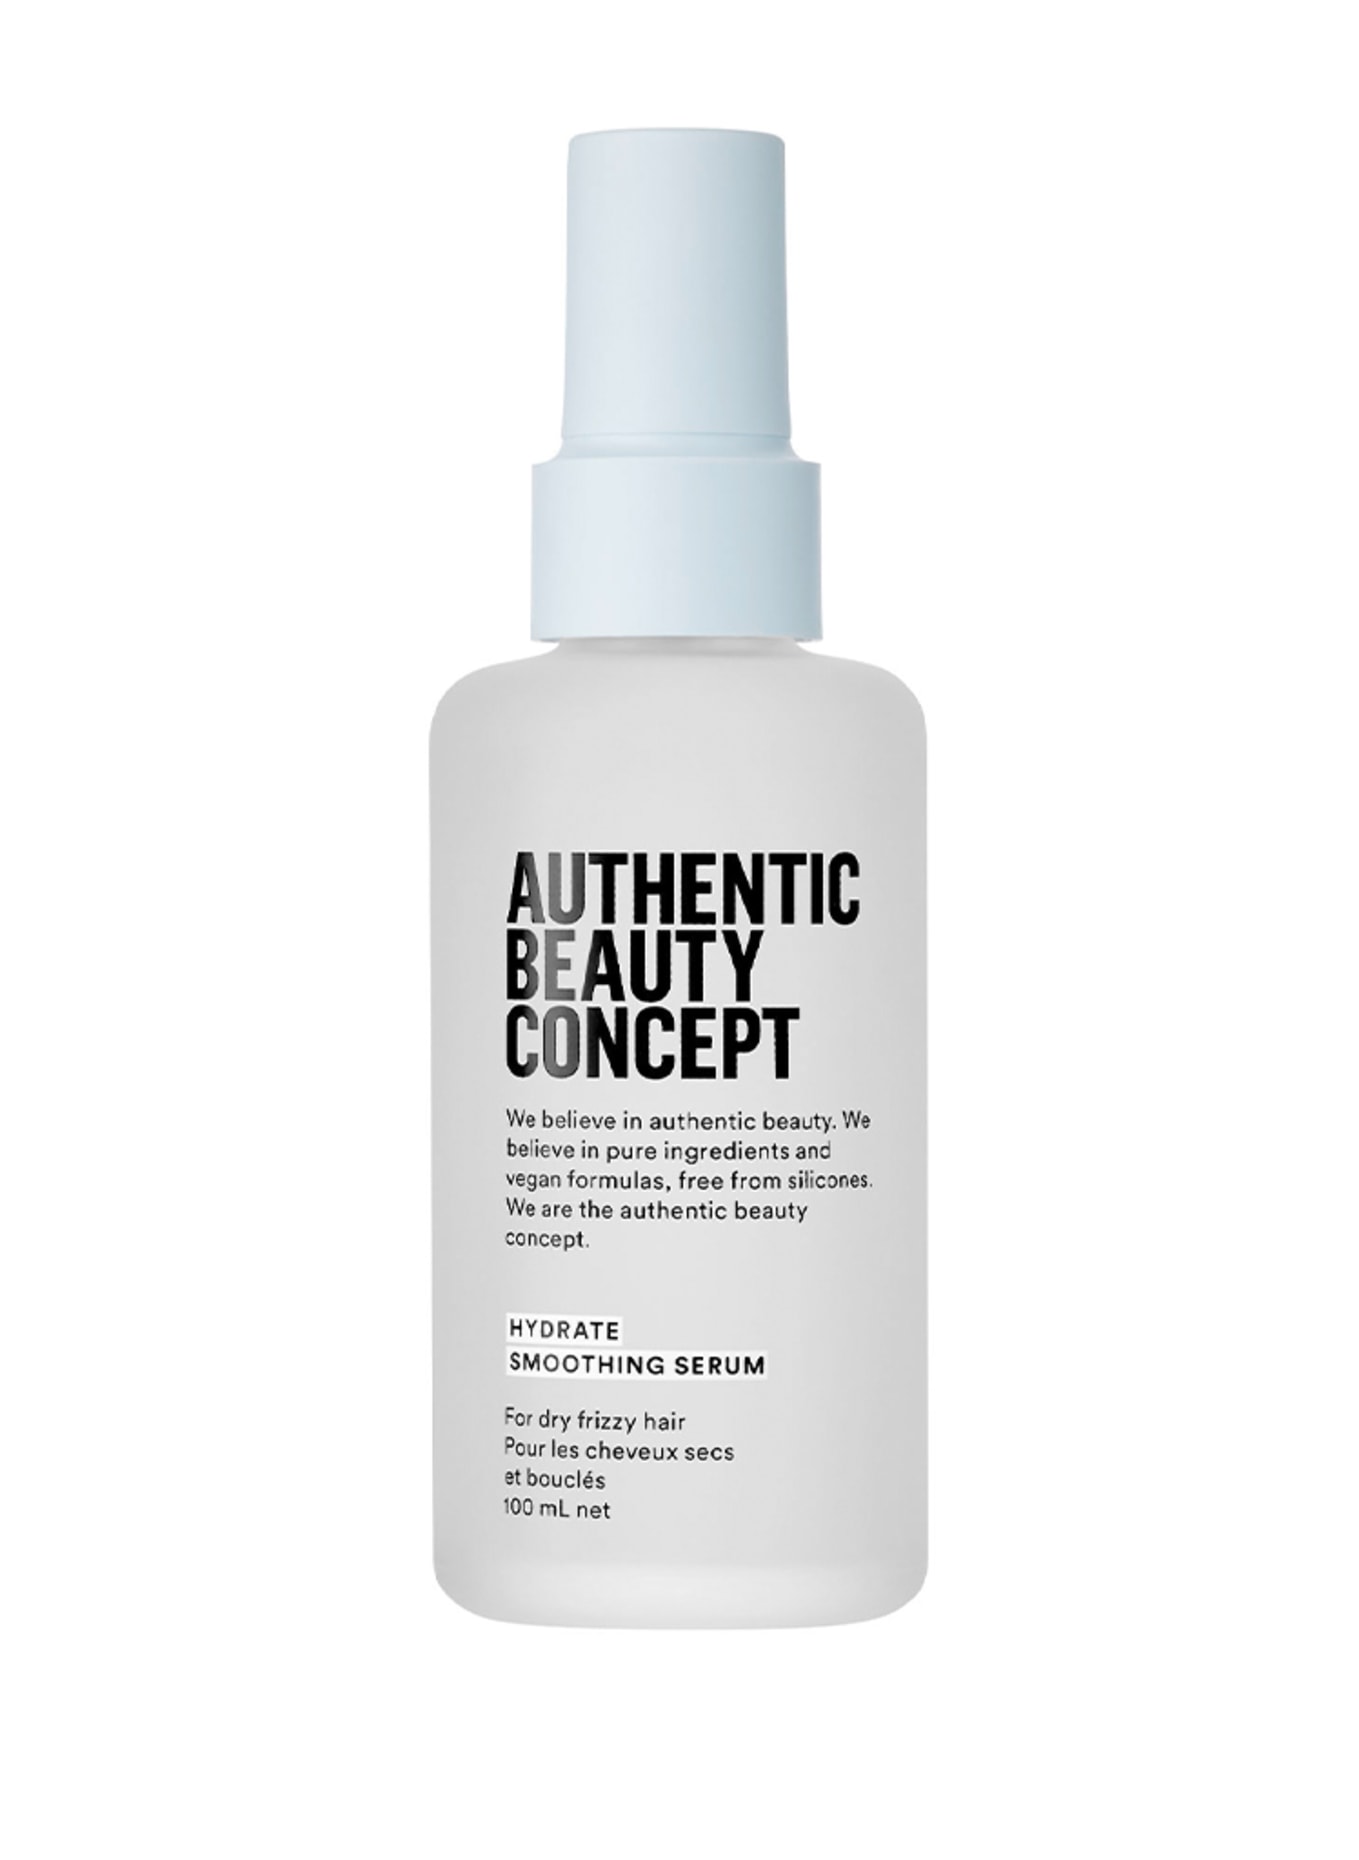 AUTHENTIC BEAUTY CONCEPT HYDRATE SMOOTHING SERUM (Obrázek 1)